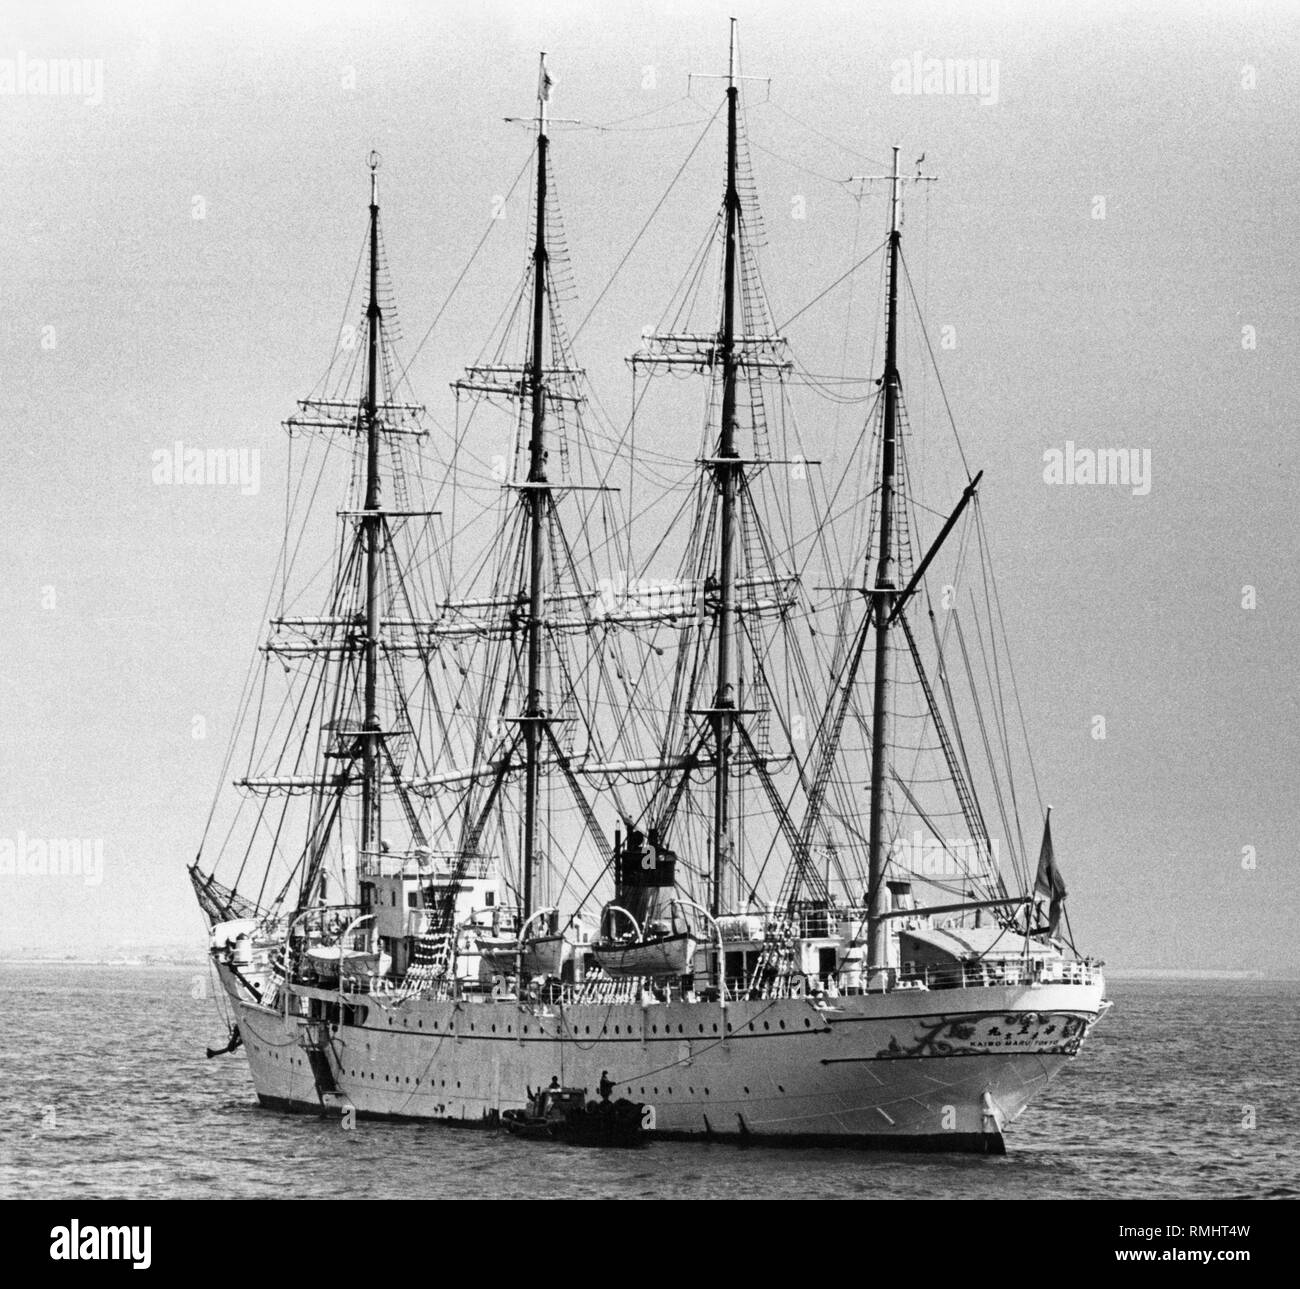 The four-masted barque 'Kaiwo Maru' is a Japanese sail training ship. In 1989 she was replaced by a new ship of the same name. Stock Photo